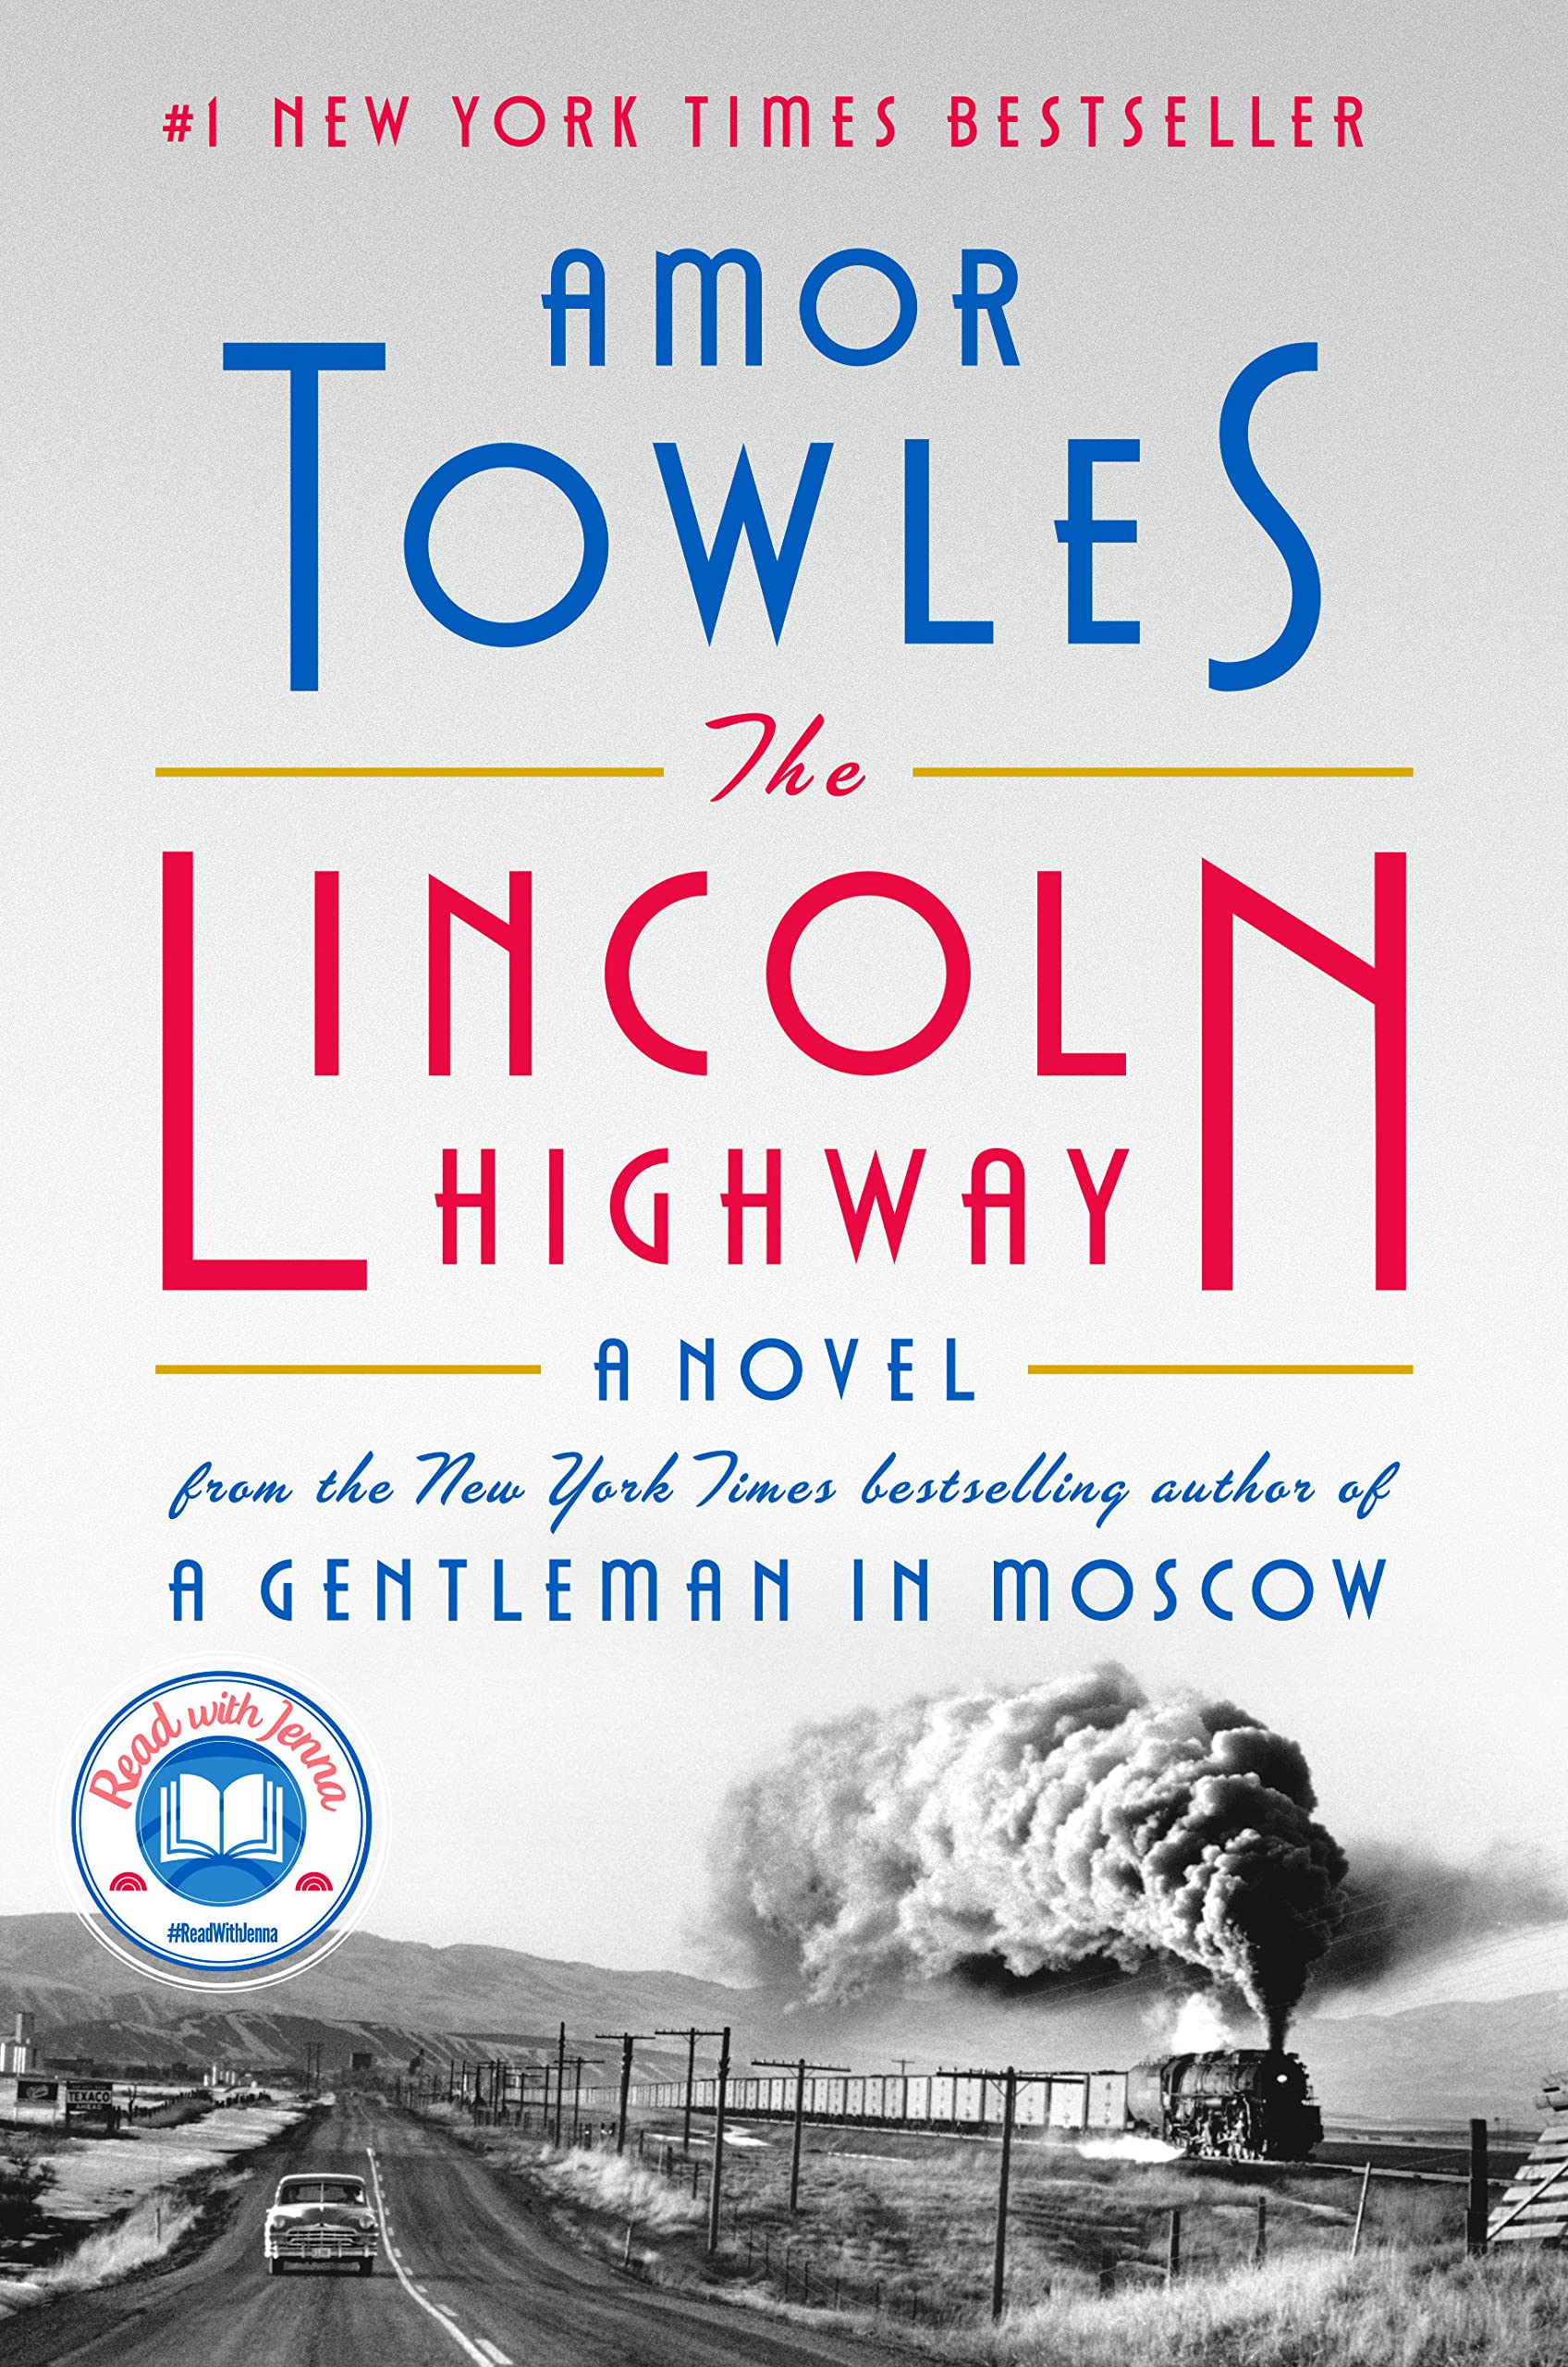 Image of the book cover, The Lincoln Highway featuring a black and white photo of an old fashioned car driving down a highway and a steam engine train along the rail road tracks heading in the same direction as the car.  